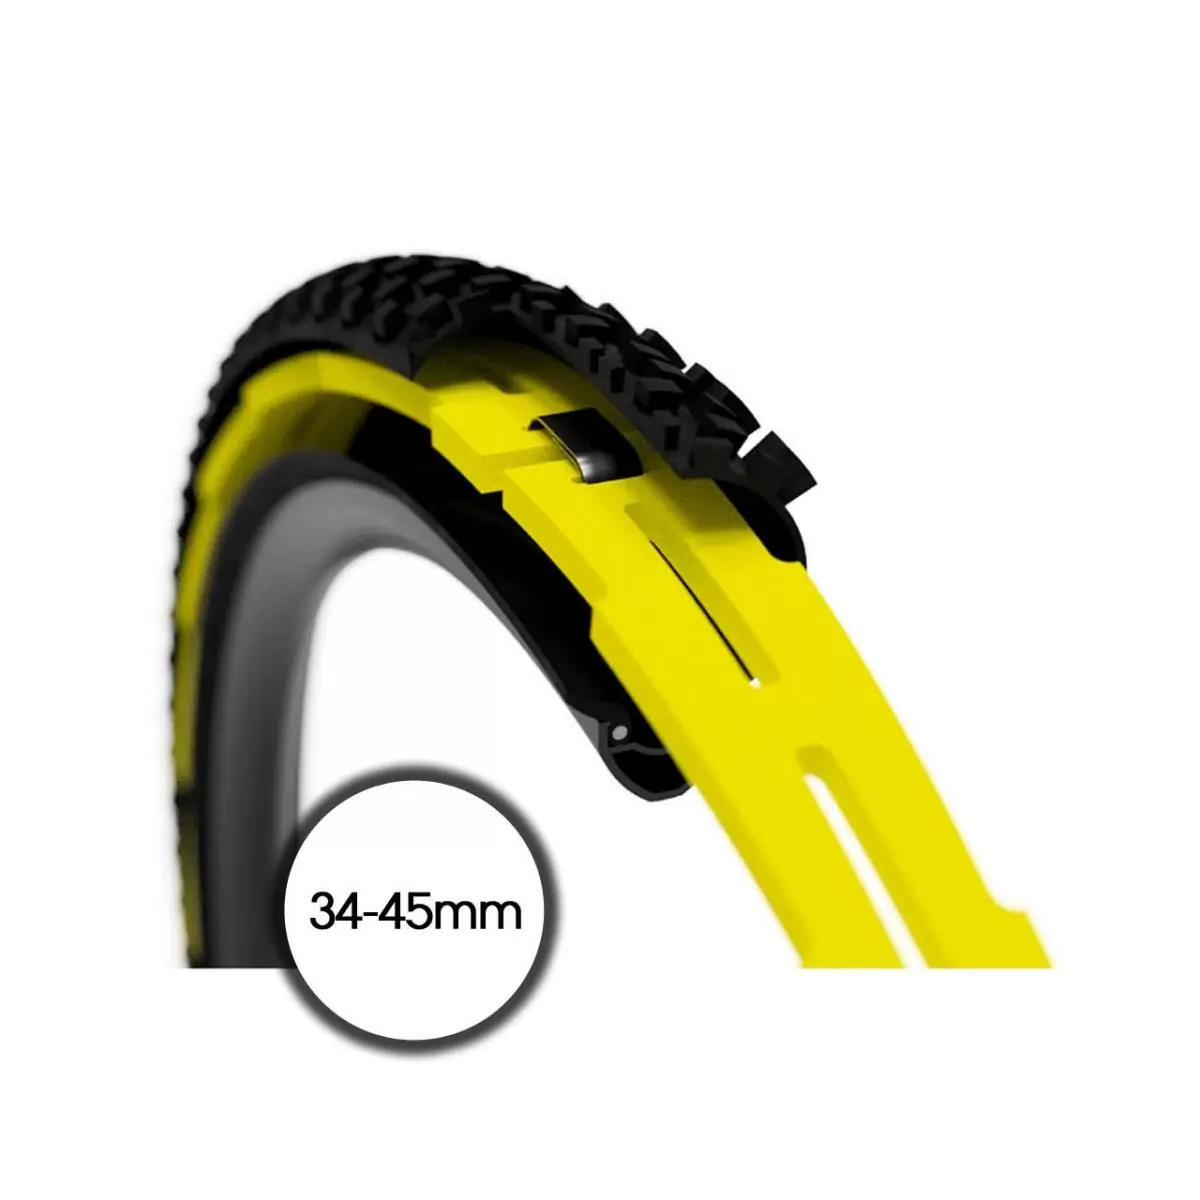 tubeless puncture prevention kit size l rim width 34-45mm - image